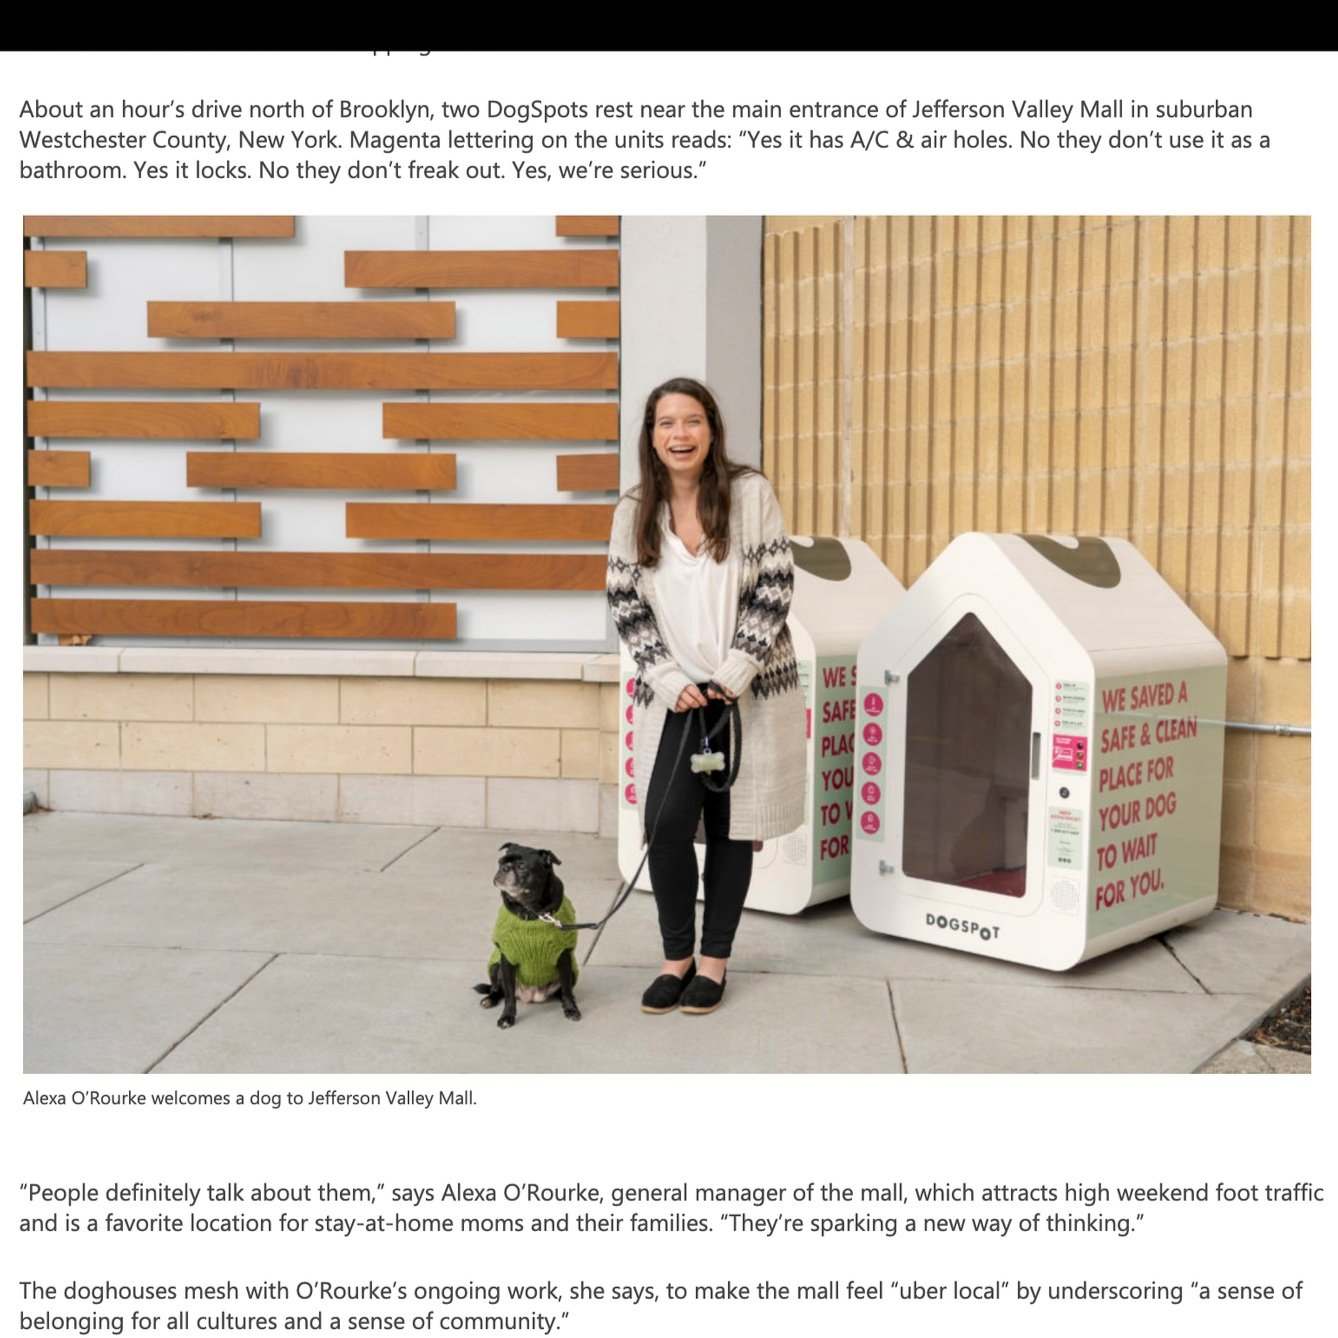 Microsoft News: Putting the tail in retail: These smart doghouses are sniffing out new fans across the country (Copy)